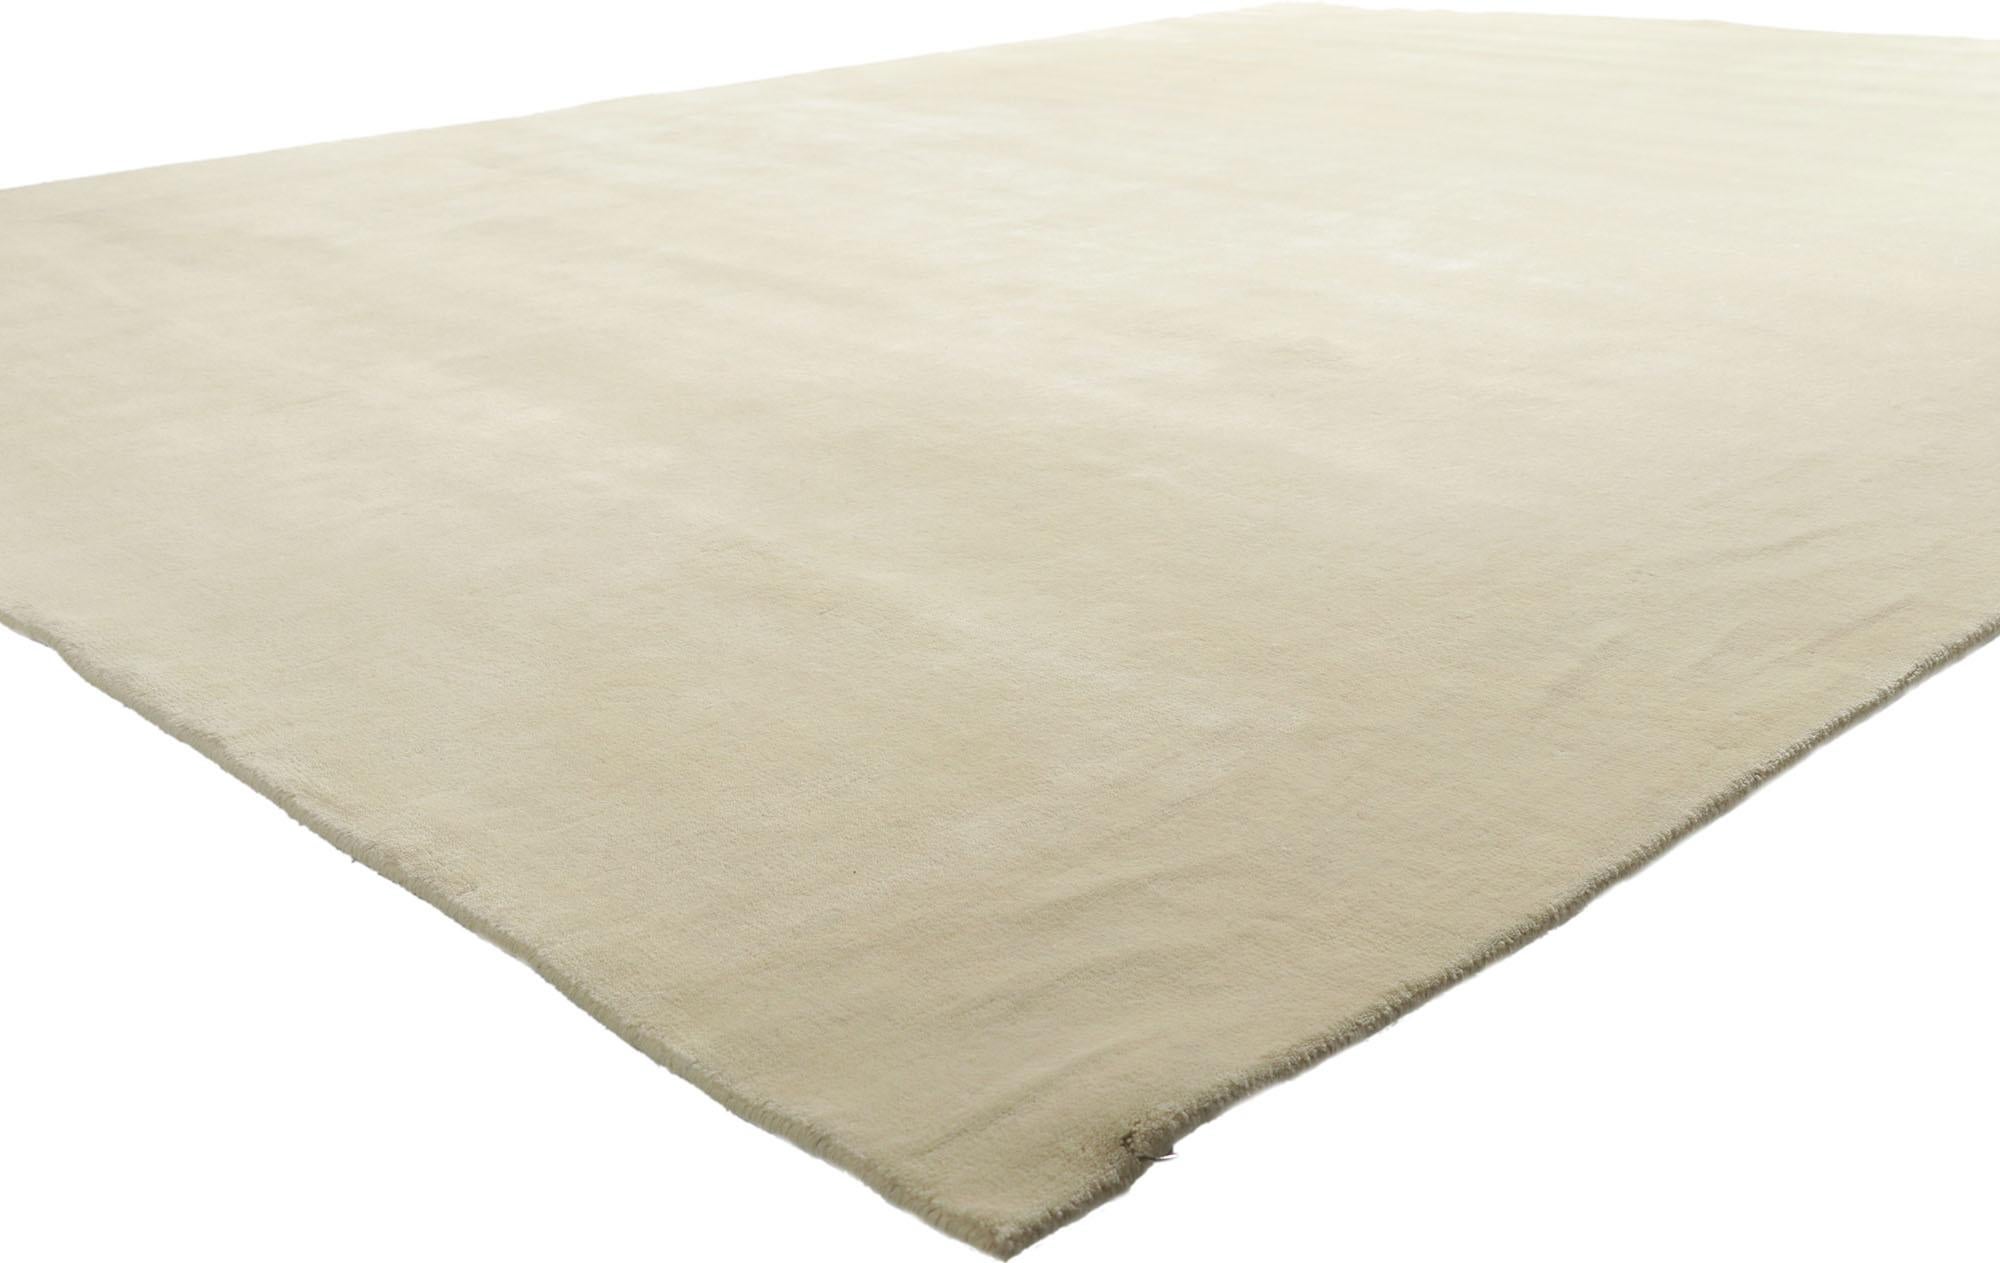 30747 New Contemporary Ivory Area Rug with Minimalist Style, 09'11 x 12'11. ​Immersed in the captivating world of contemporary allure and nuanced minimalism, this meticulously crafted wool rug unfolds with grace from the adept looms of modern India.